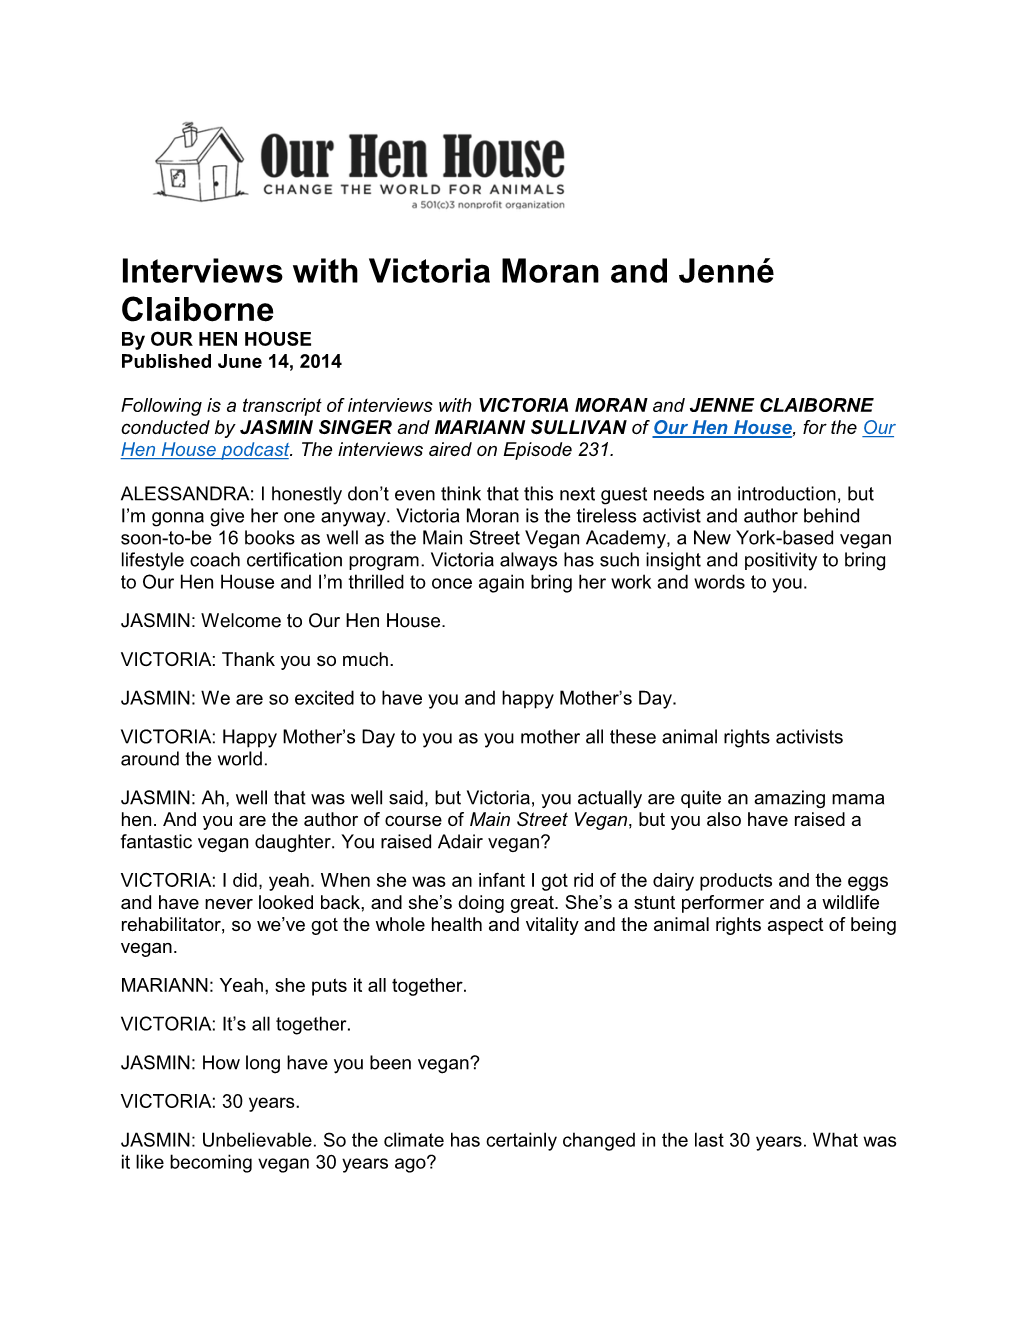 Interviews with Victoria Moran and Jenné Claiborne by OUR HEN HOUSE Published June 14, 2014